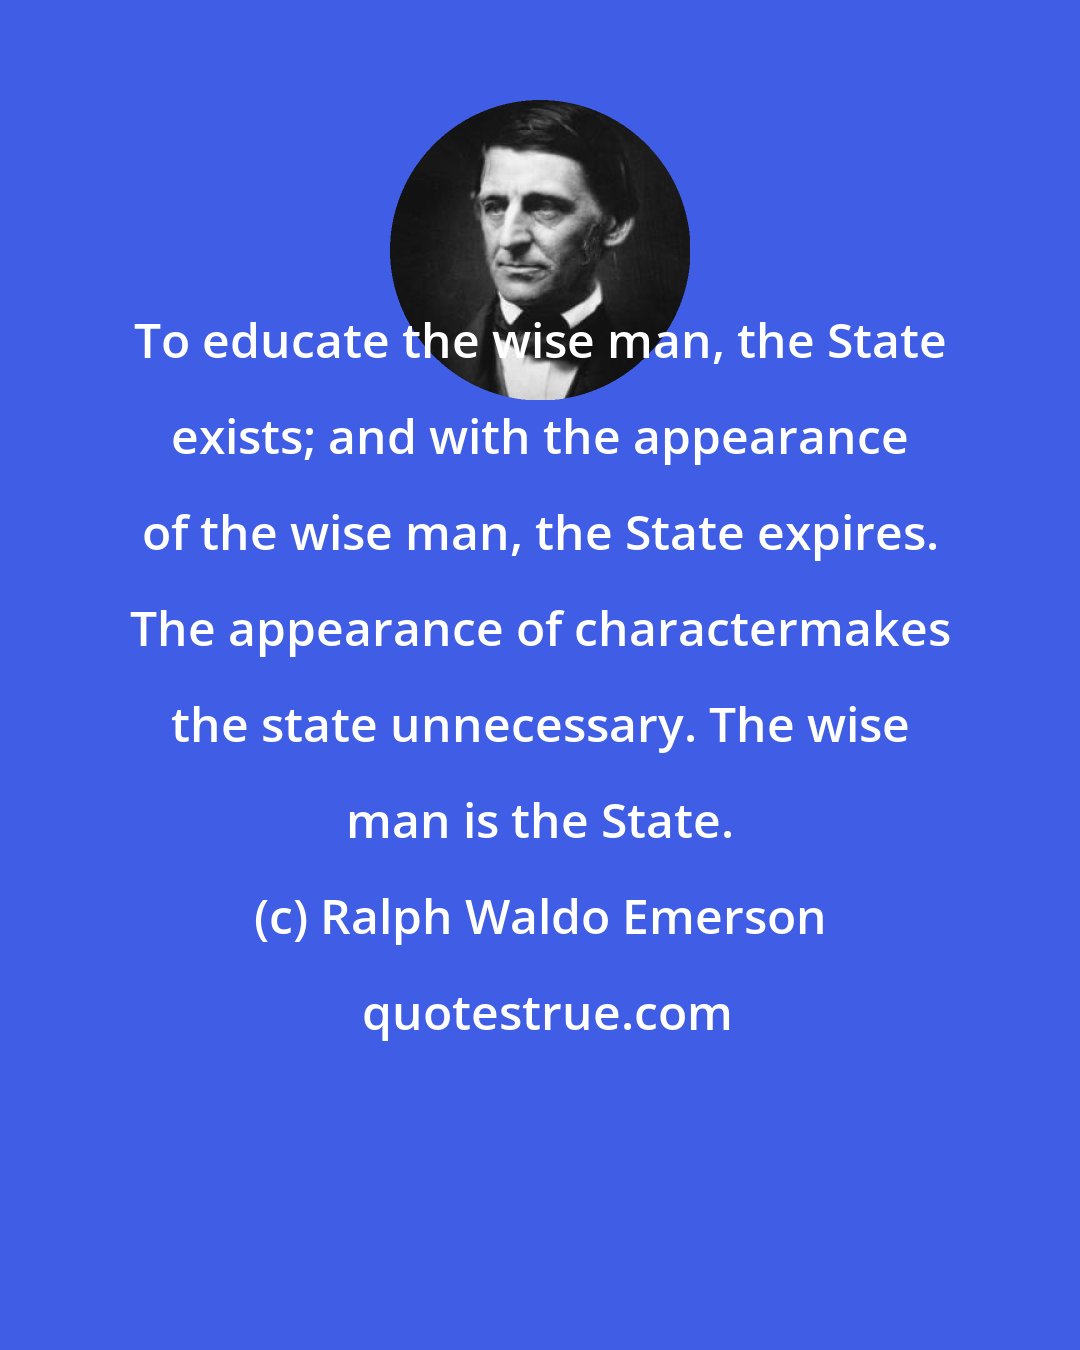 Ralph Waldo Emerson: To educate the wise man, the State exists; and with the appearance of the wise man, the State expires. The appearance of charactermakes the state unnecessary. The wise man is the State.